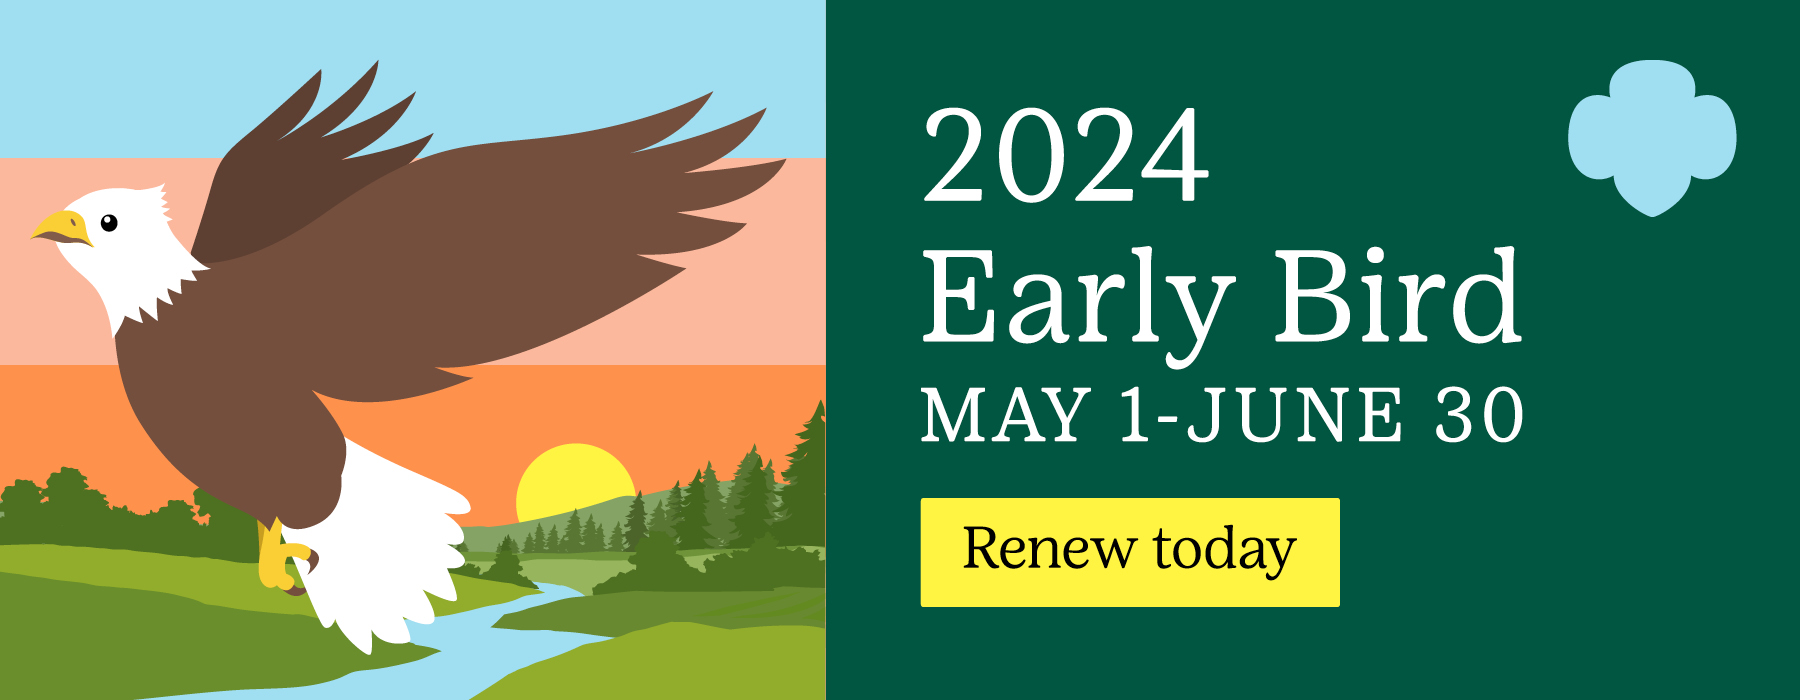 Illustration of a bald eagle with text 2024 Early Bird May 1 through June 30